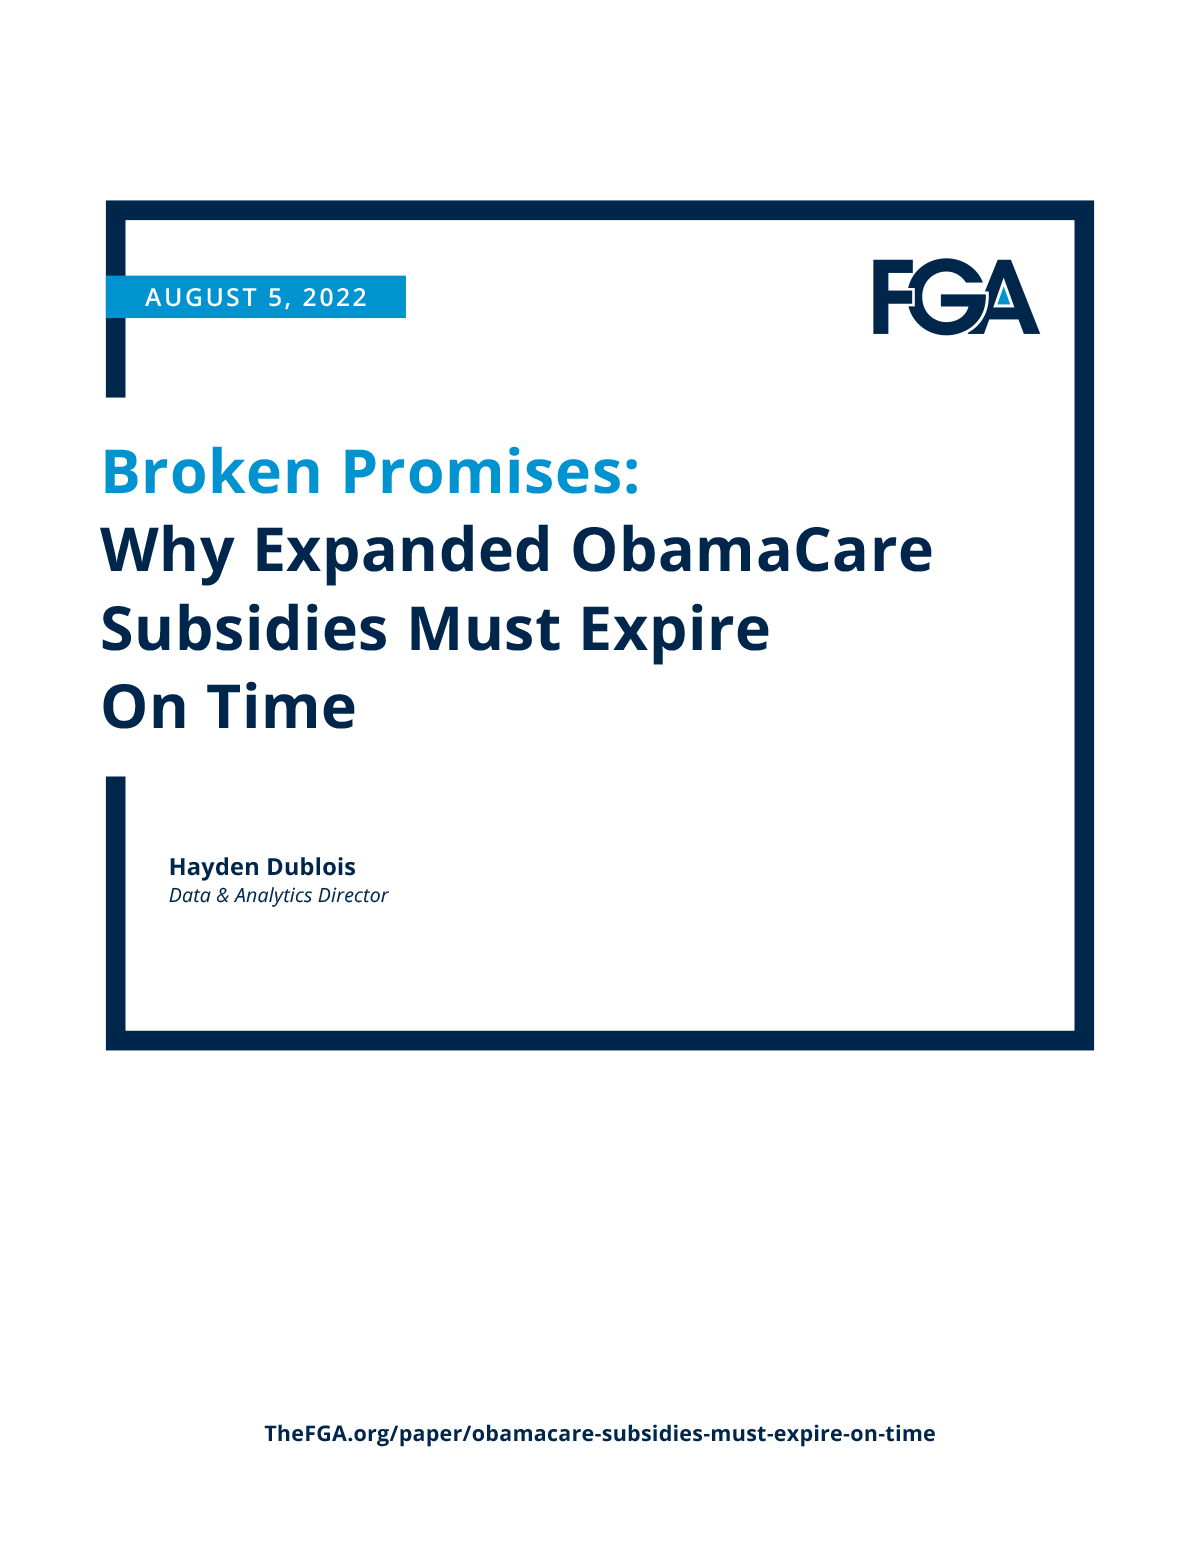 Broken Promises: Why Expanded ObamaCare Subsidies Must Expire On Time